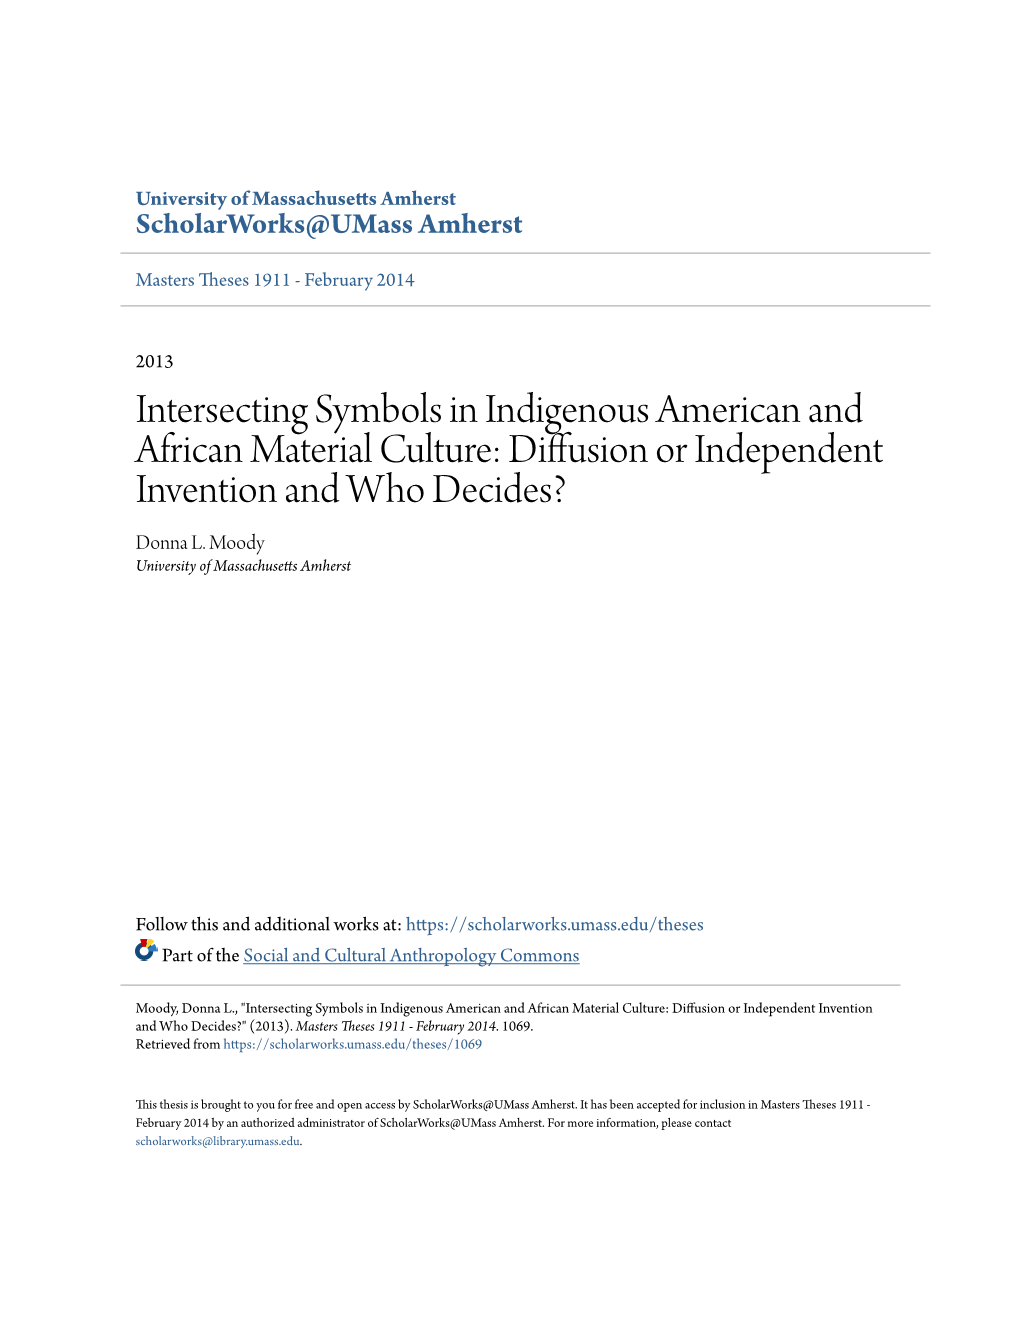 Intersecting Symbols in Indigenous American and African Material Culture: Diffusion Or Independent Invention and Who Decides? Donna L